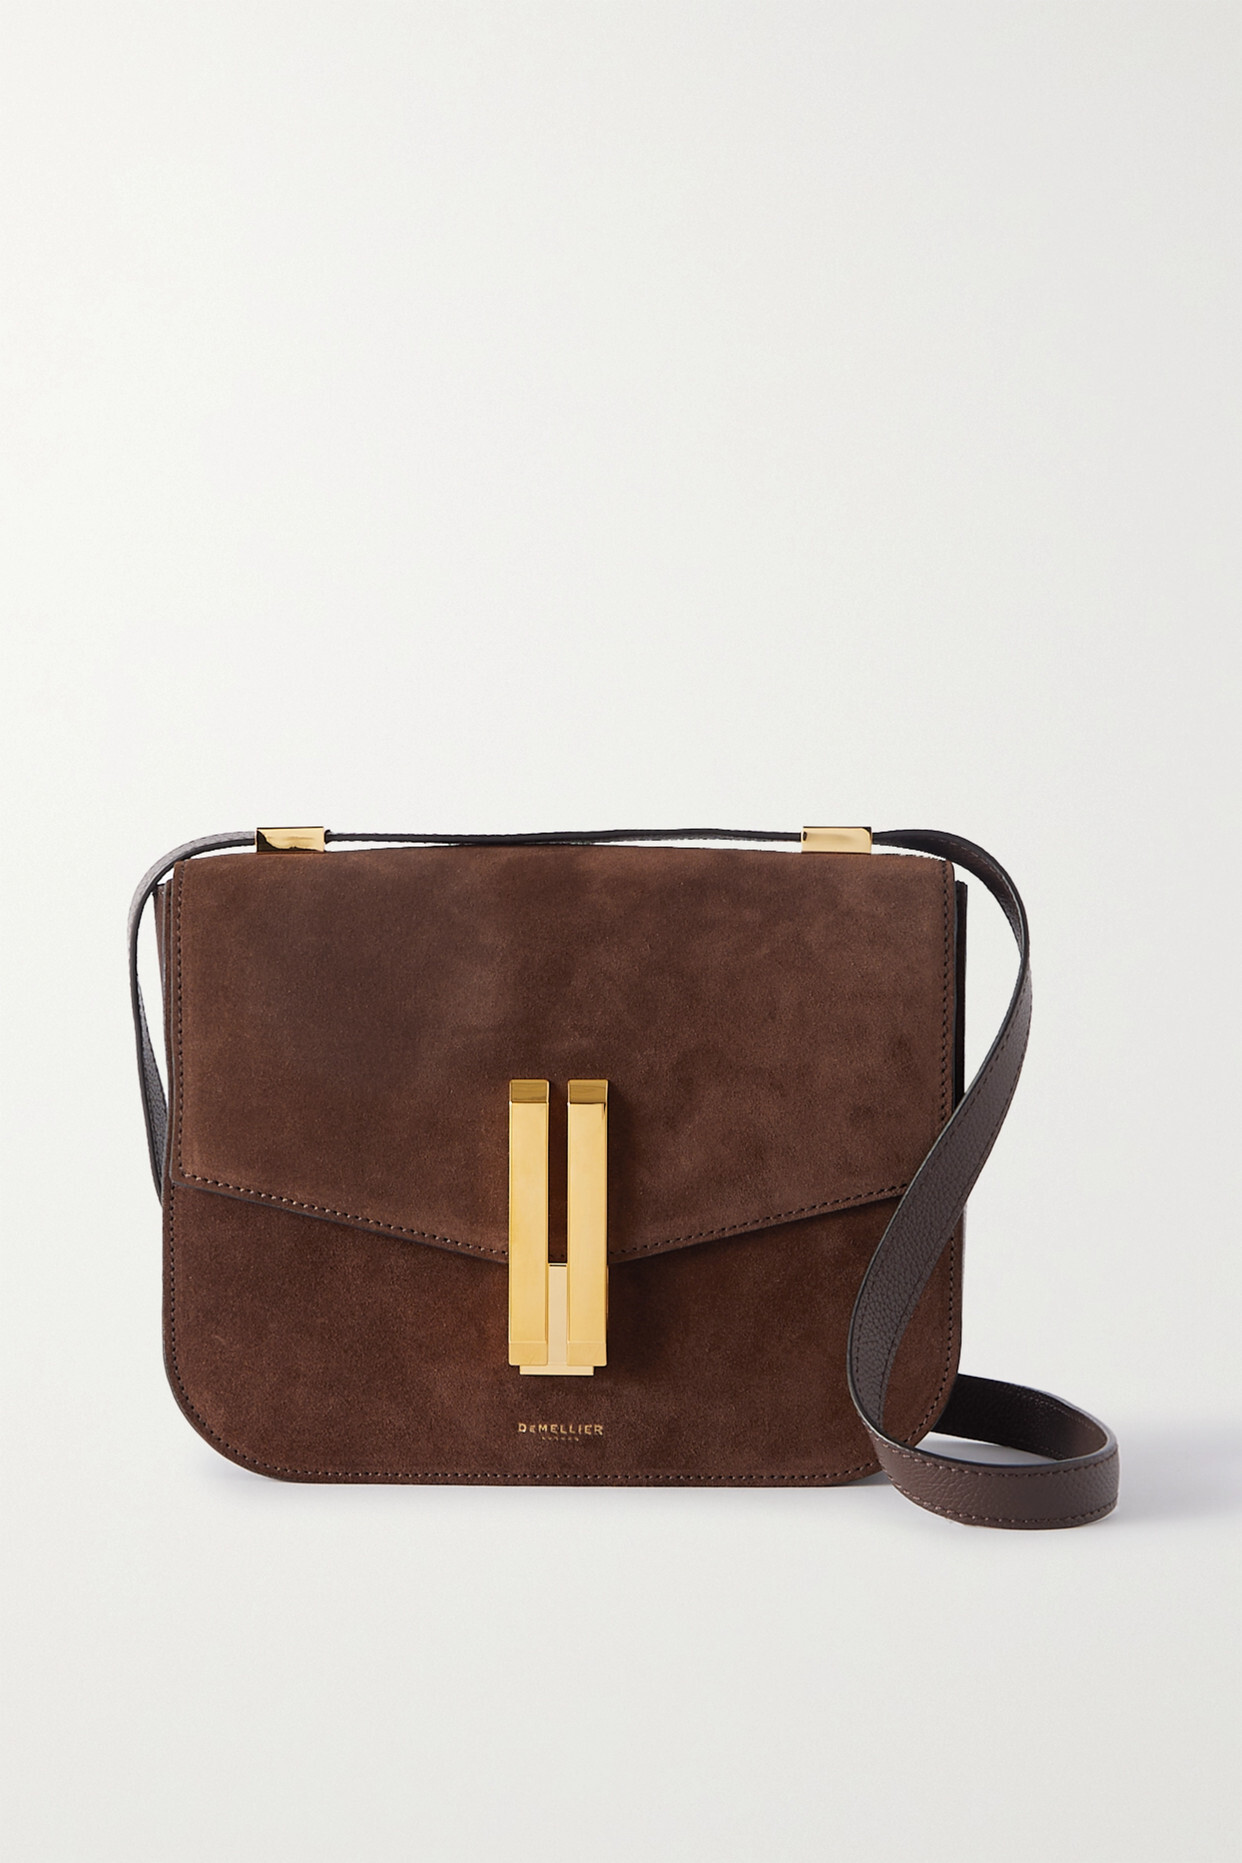 DeMellier - + Net Sustain Vancouver Suede And Textured-leather Shoulder Bag - Brown